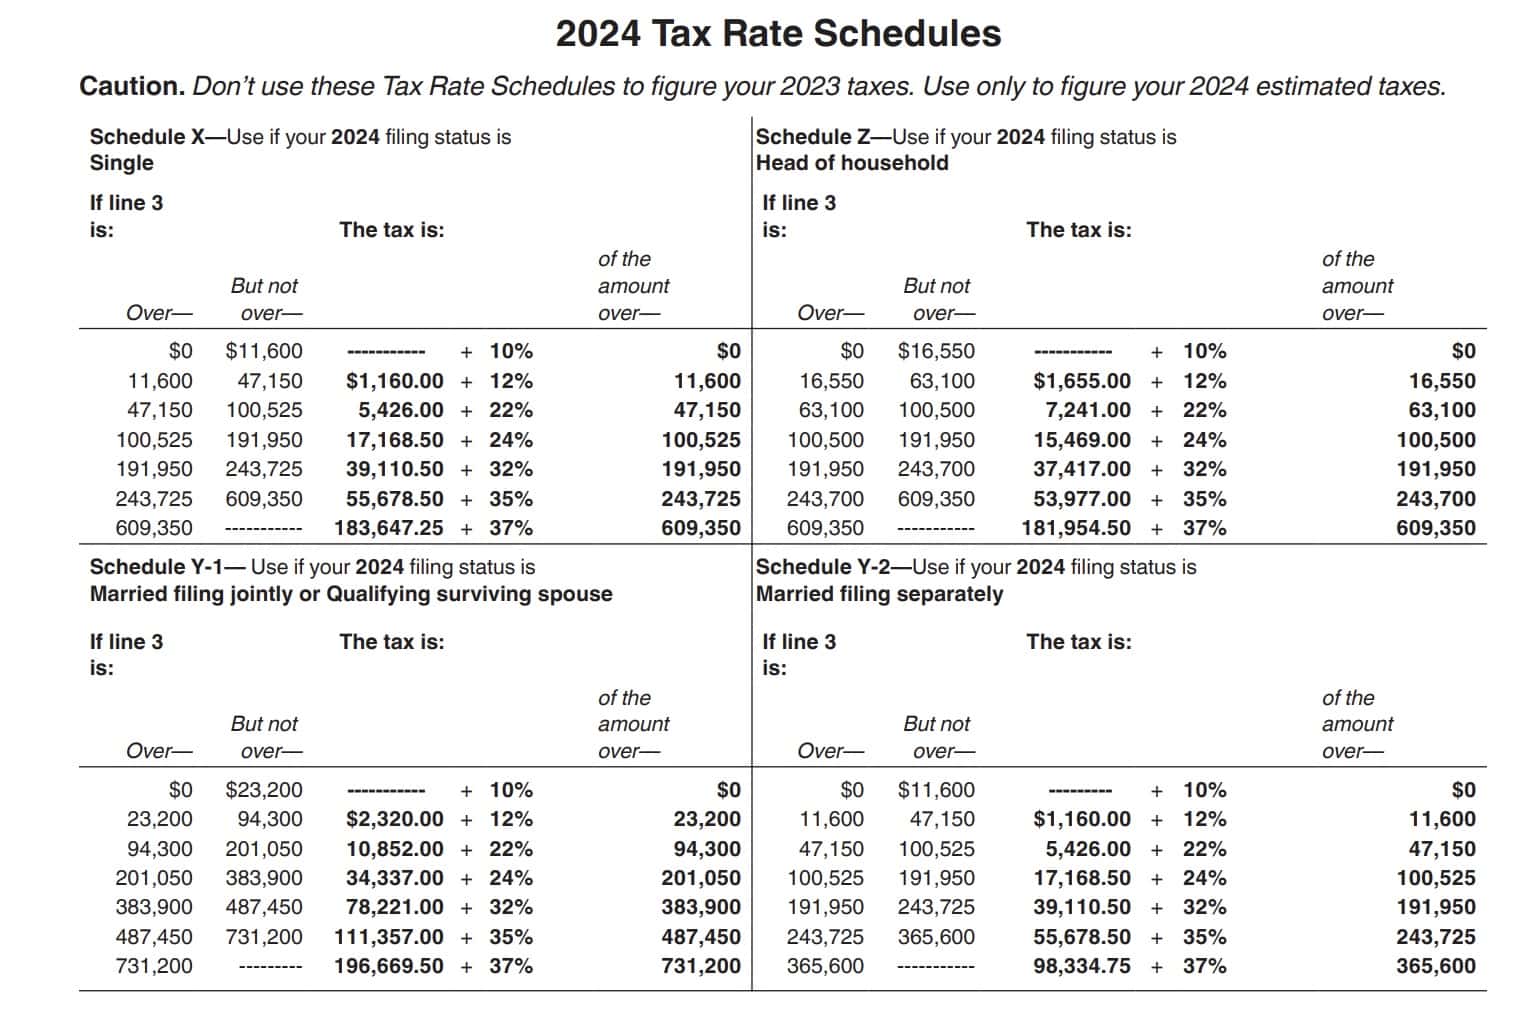 2024 tax rate schedules from irs form 1040-es